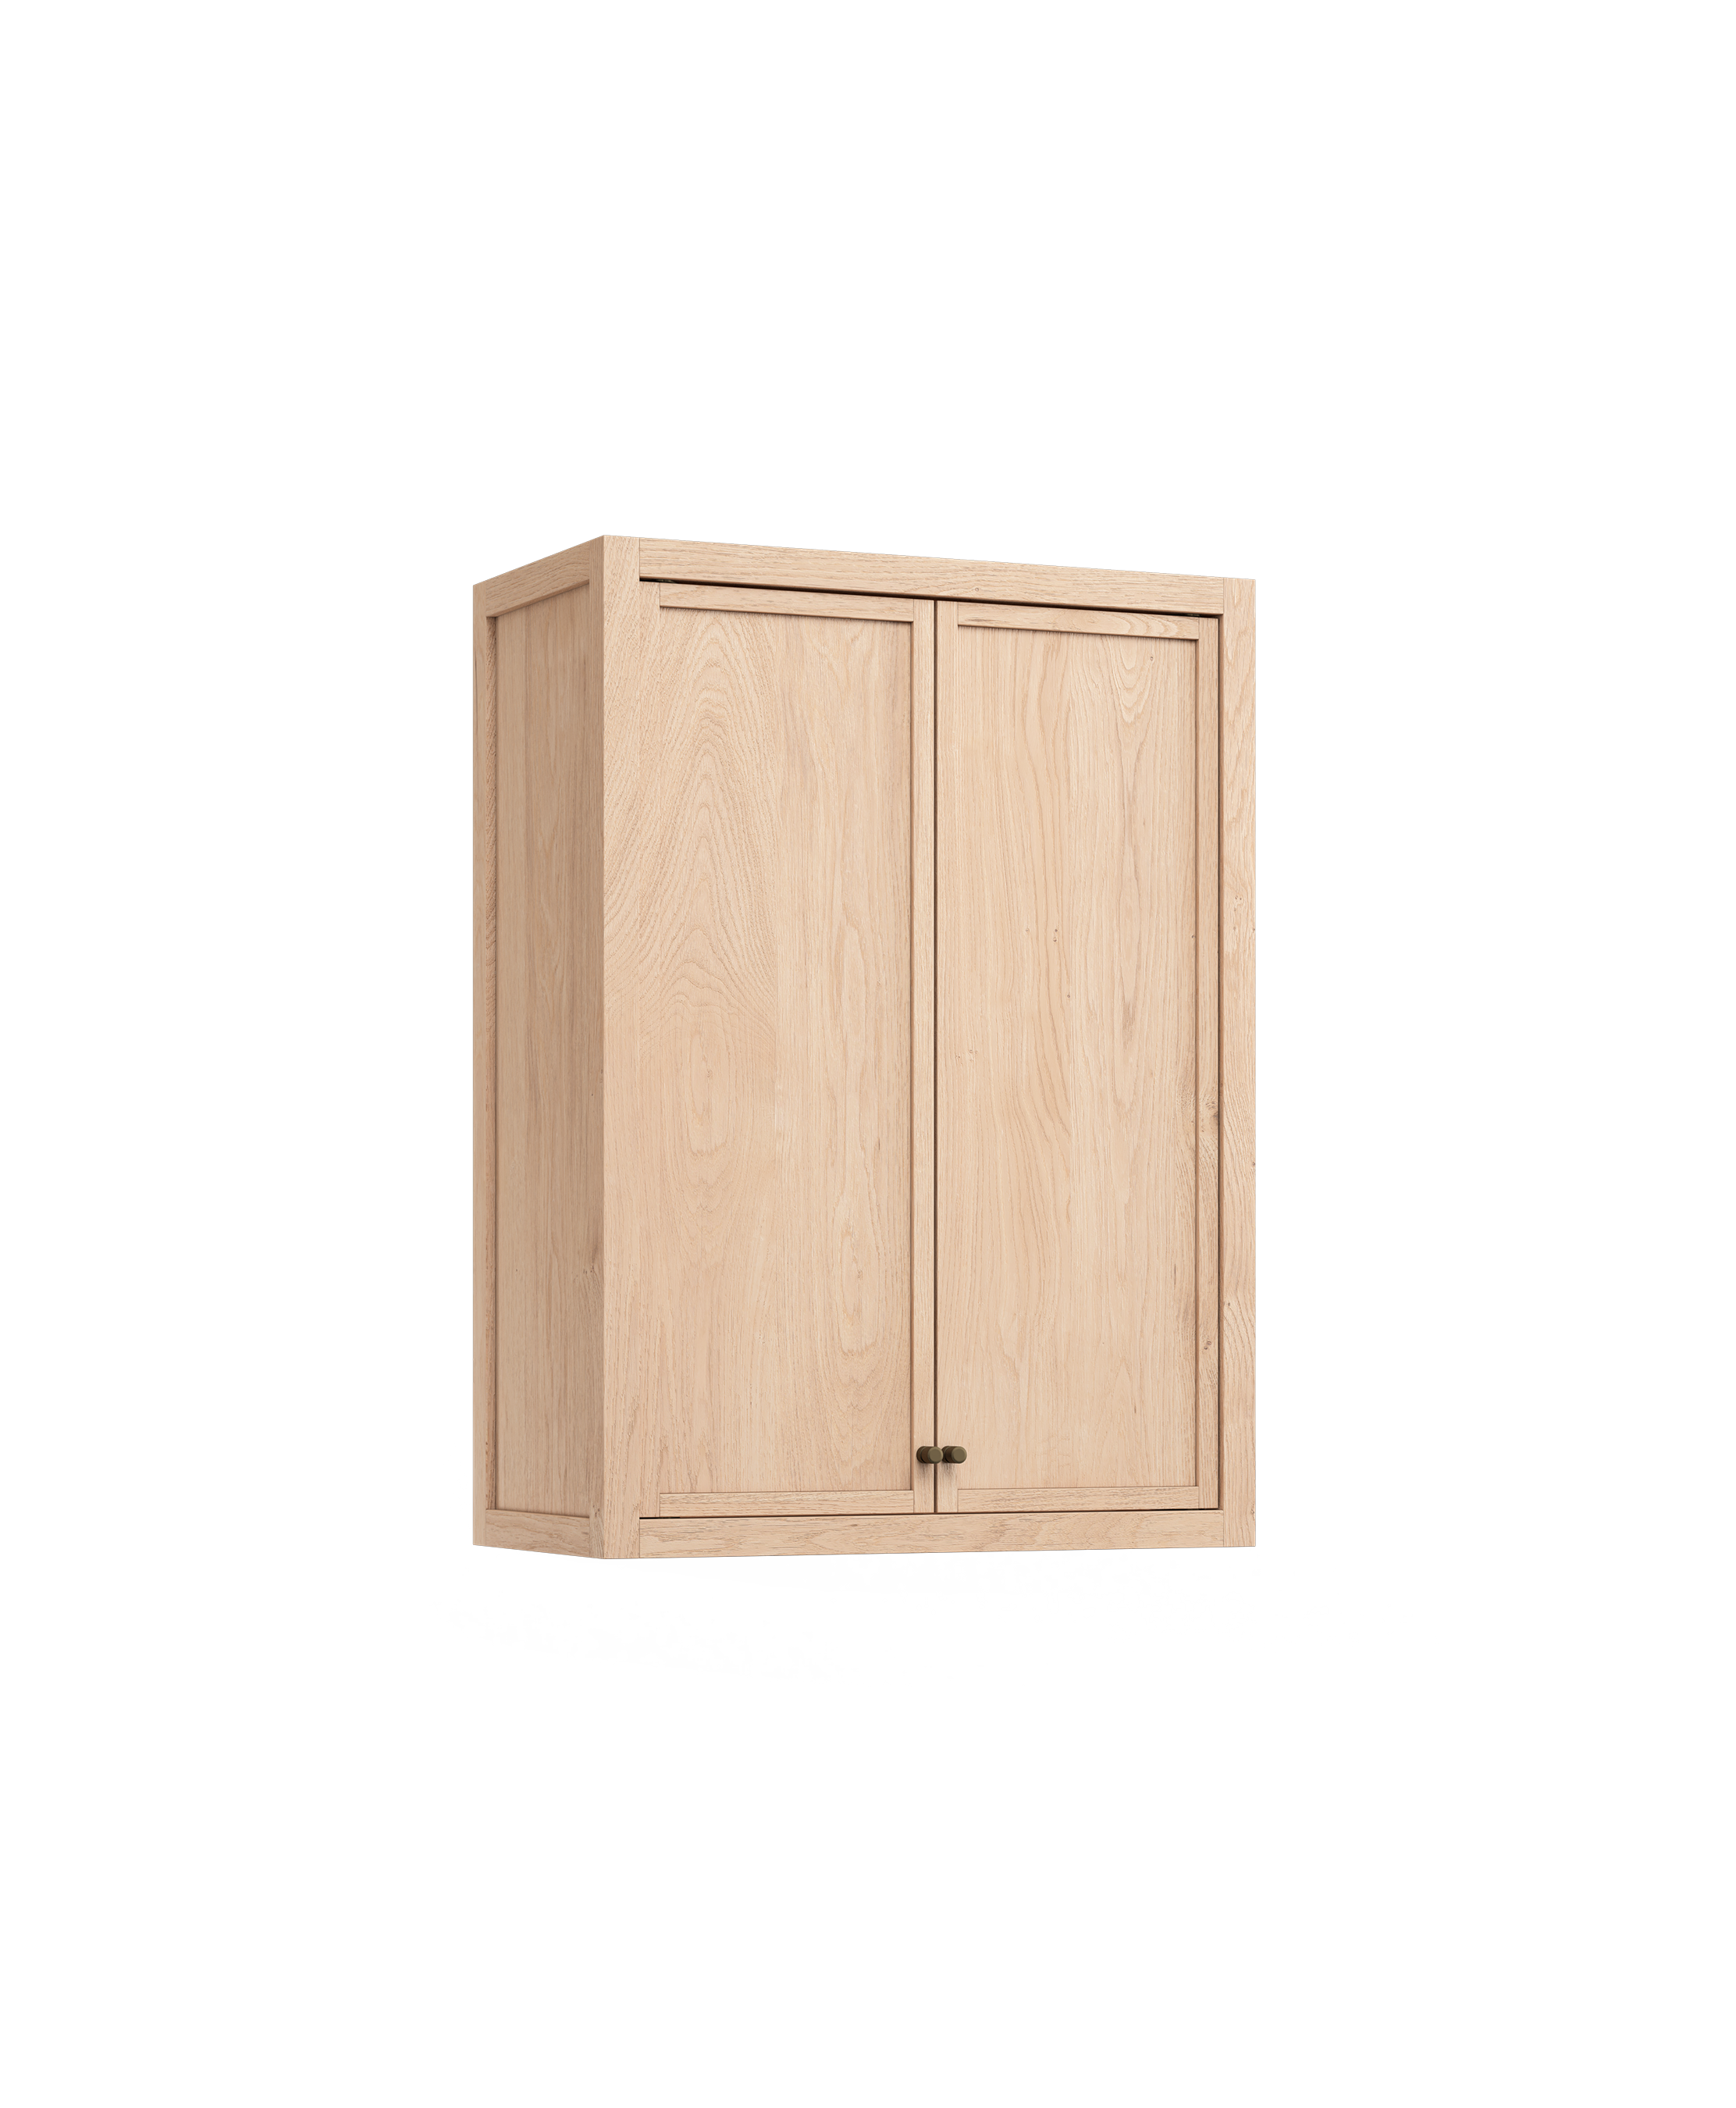 Coquo wall cabinet in natural oak, with shaker wood doors and bronze metal.  